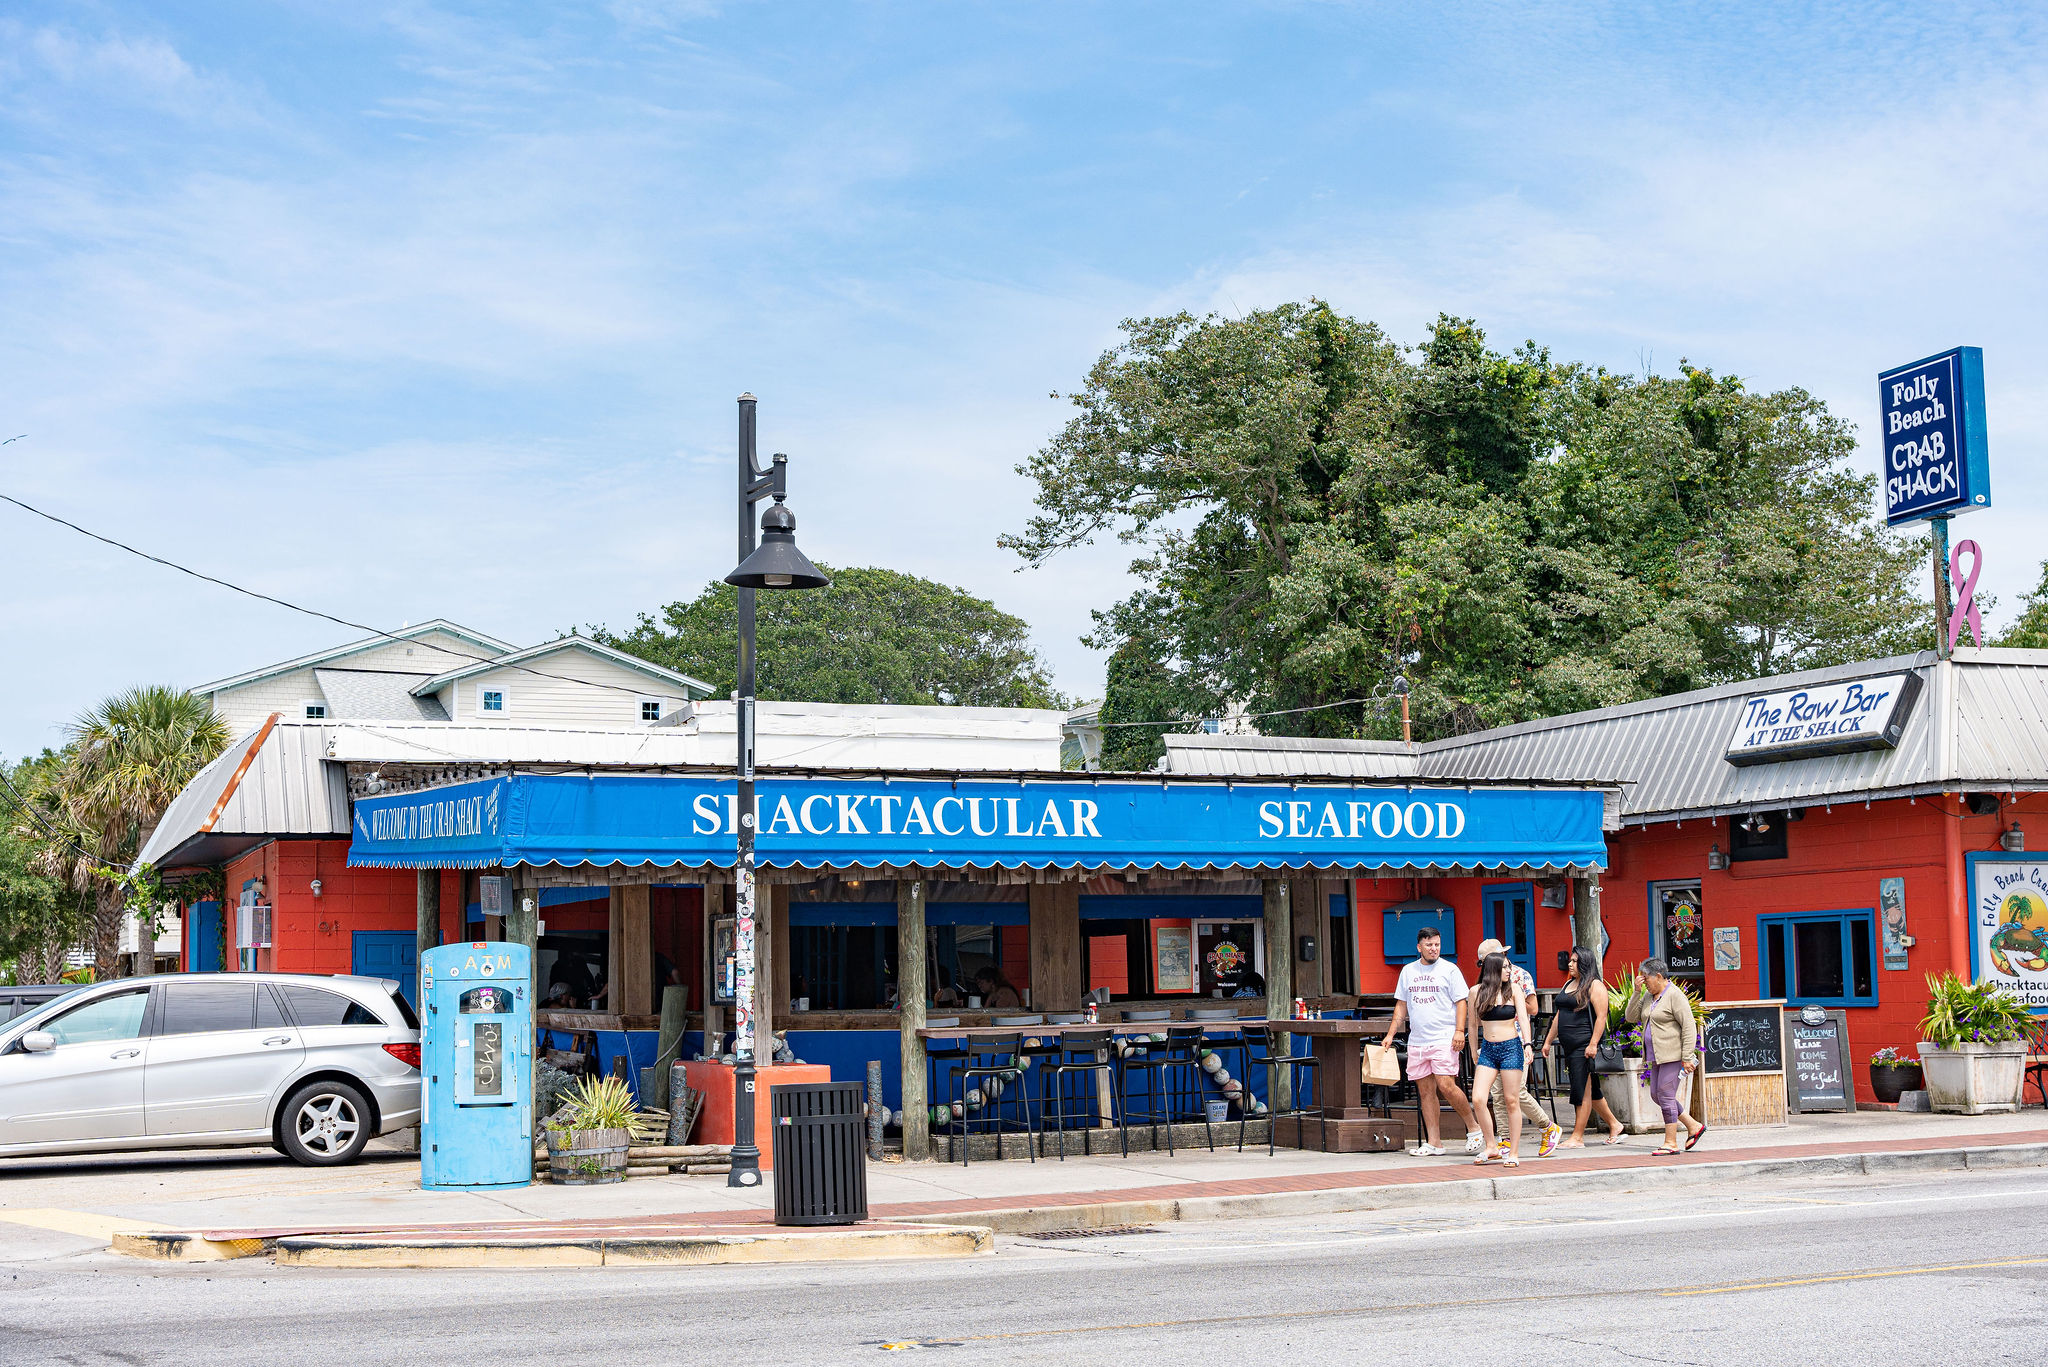 Exterior view of The Crab Shack located on Center Street in Folly Beach SC